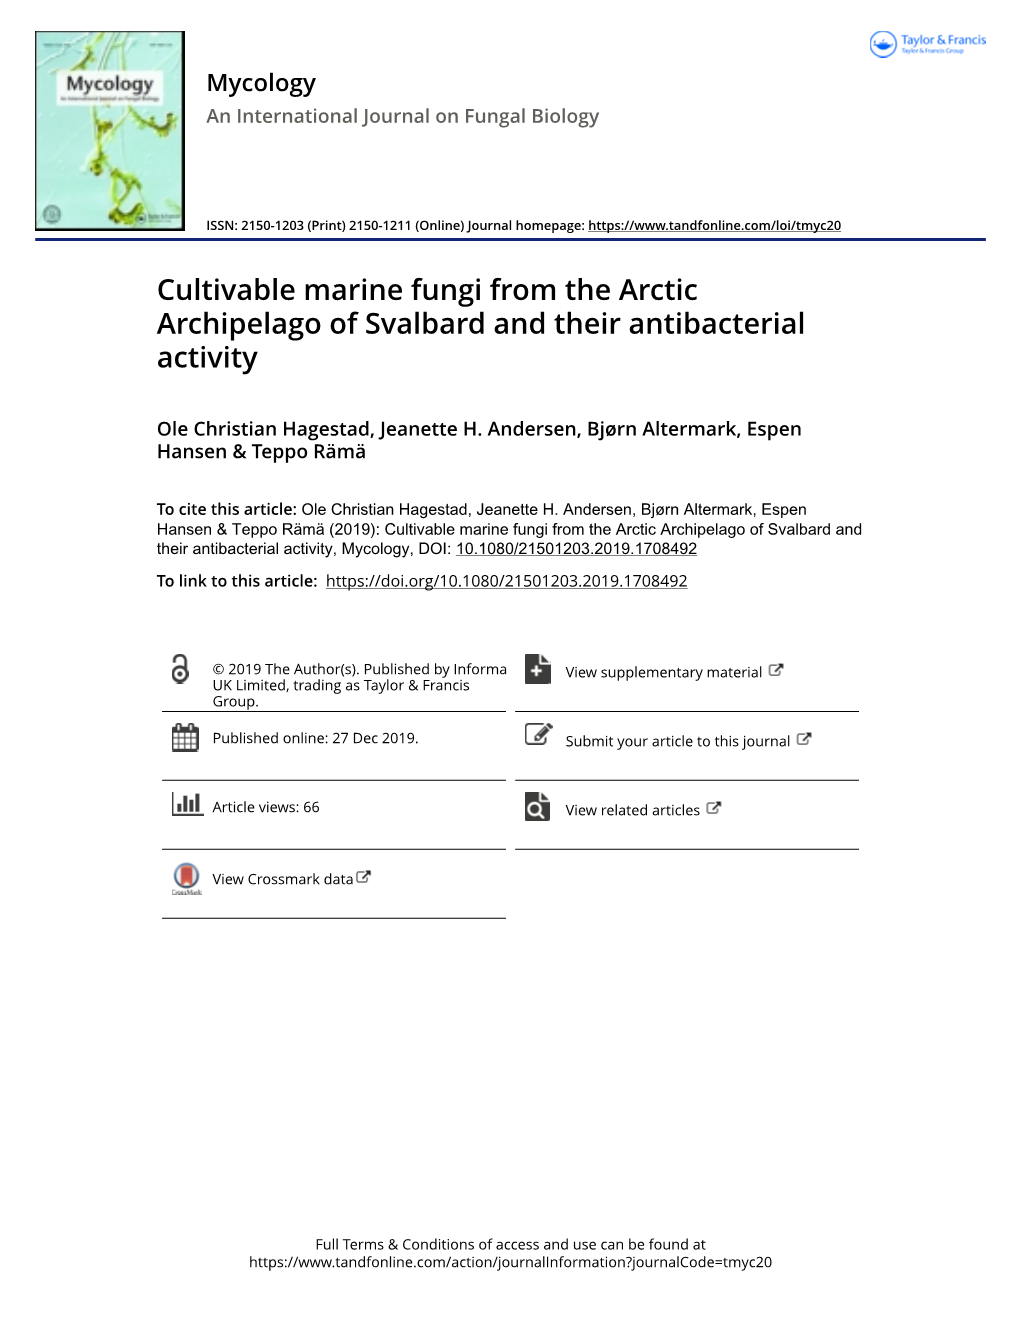 Cultivable Marine Fungi from the Arctic Archipelago of Svalbard and Their Antibacterial Activity